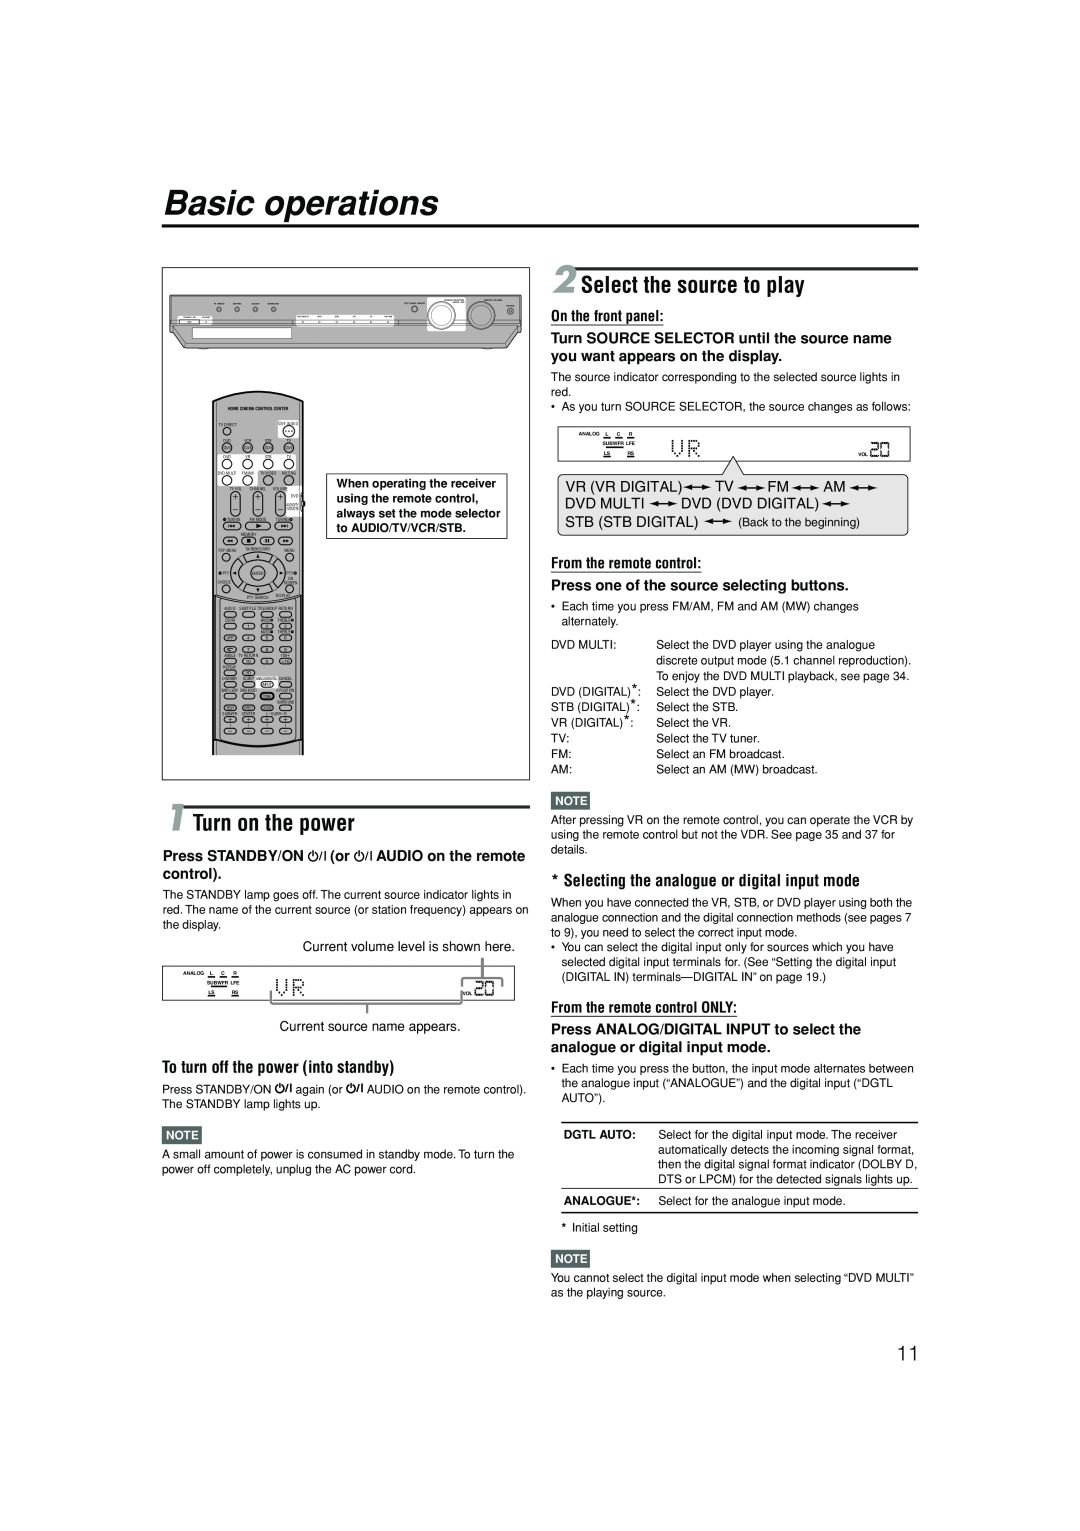 JVC LVT1112-001A manual Basic operations, Turn on the power, Select the source to play, To turn off the power into standby 